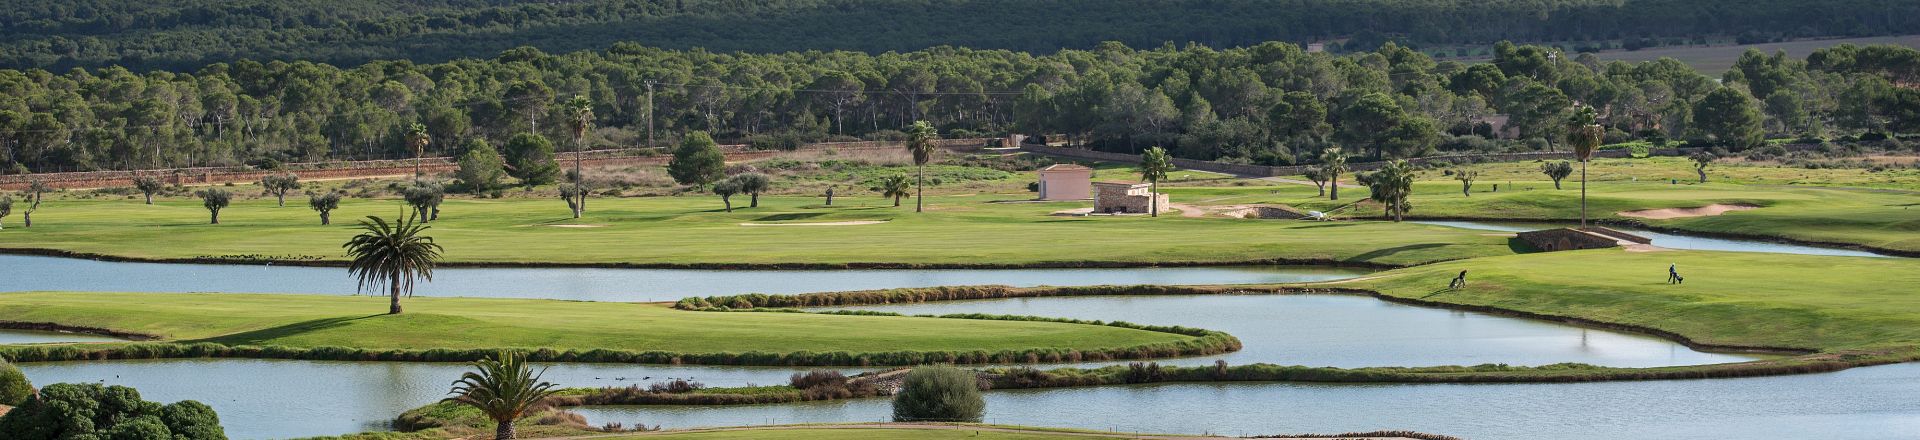 Experience golfing paradise at Golf Santa Ponsa II in Mallorca, Spain. This image captures the beauty of meticulously designed fairways against the backdrop of Mediterranean landscapes, inviting enthusiasts to a premier golfing retreat.